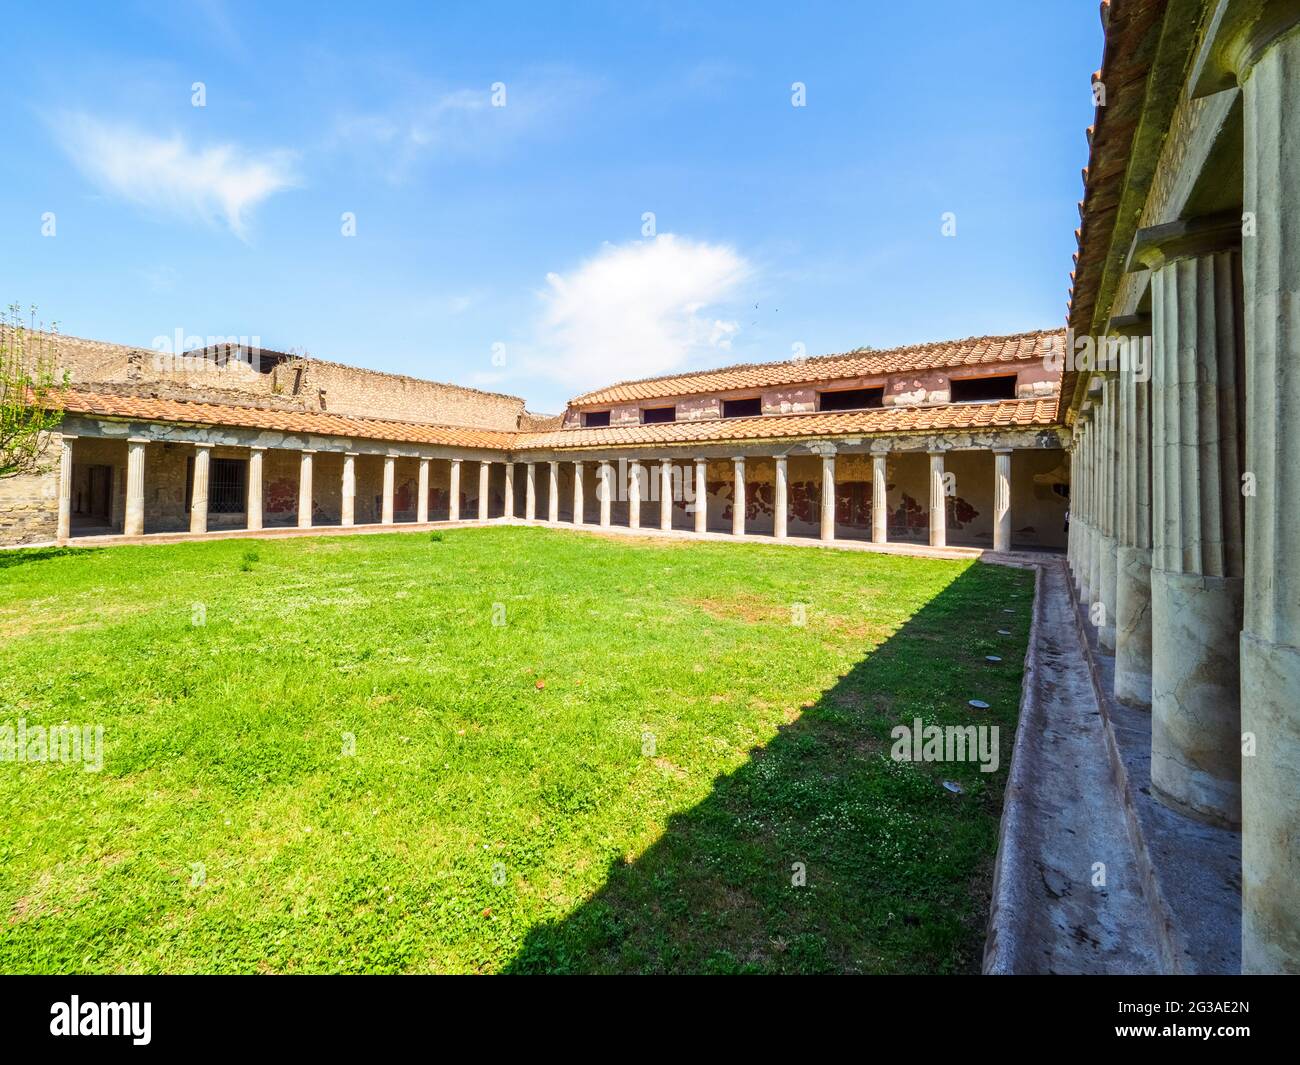 Peristyle (open courtyard or garden surrounded by a colonnade) - Oplontis known as Villa Poppaea in Torre Annunziata - Naples, Italy Stock Photo